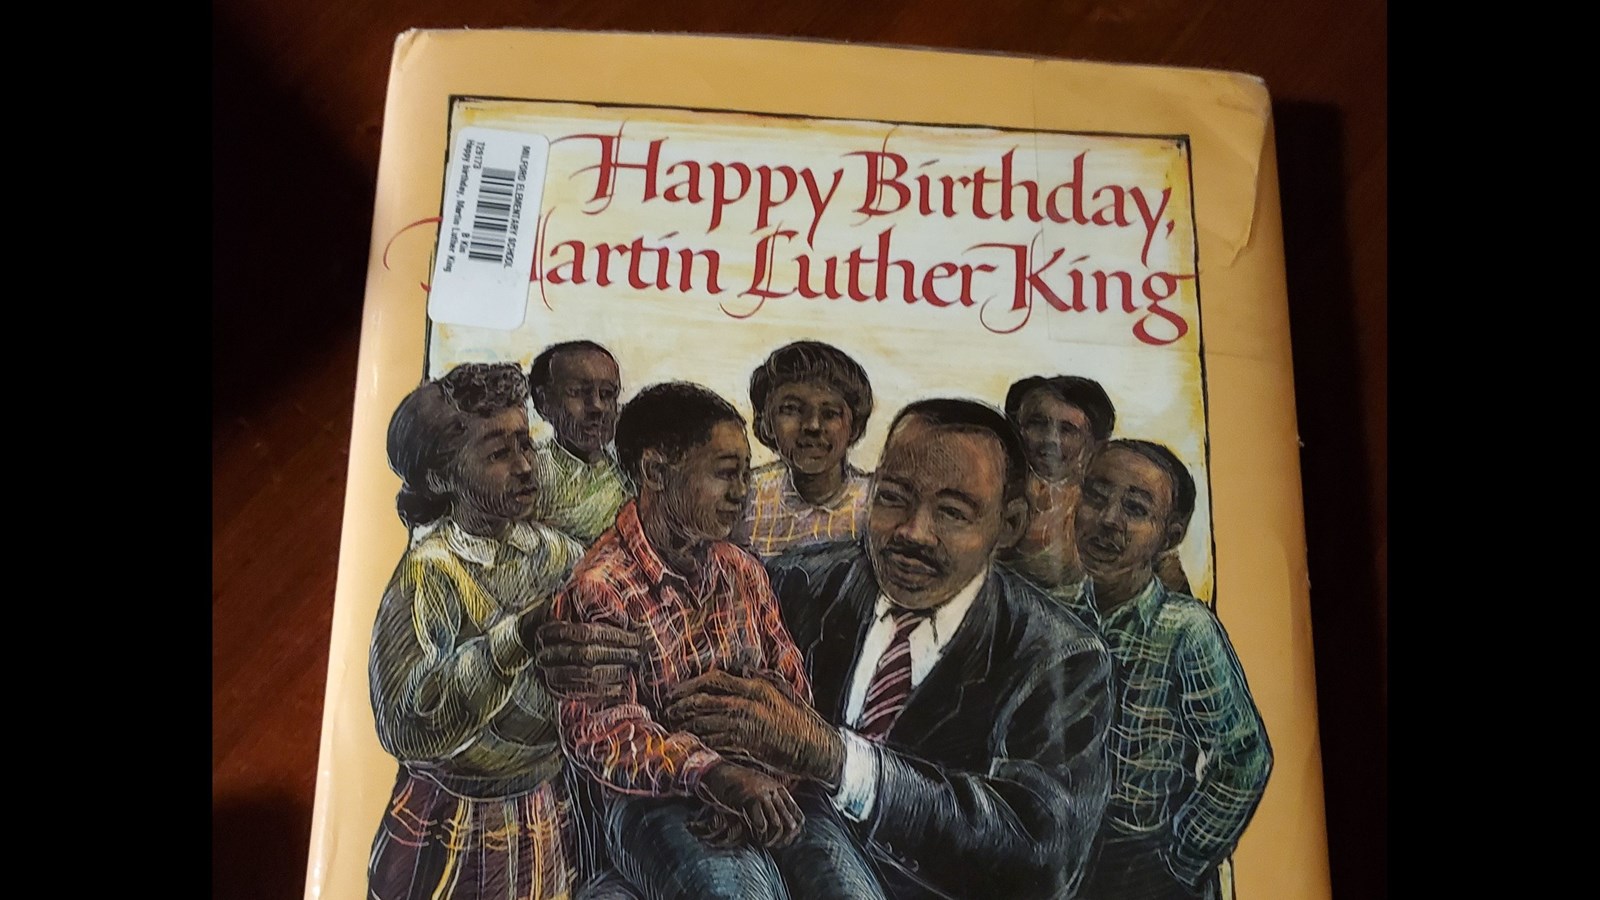 1/19: Happy Birthday Martin Luther King